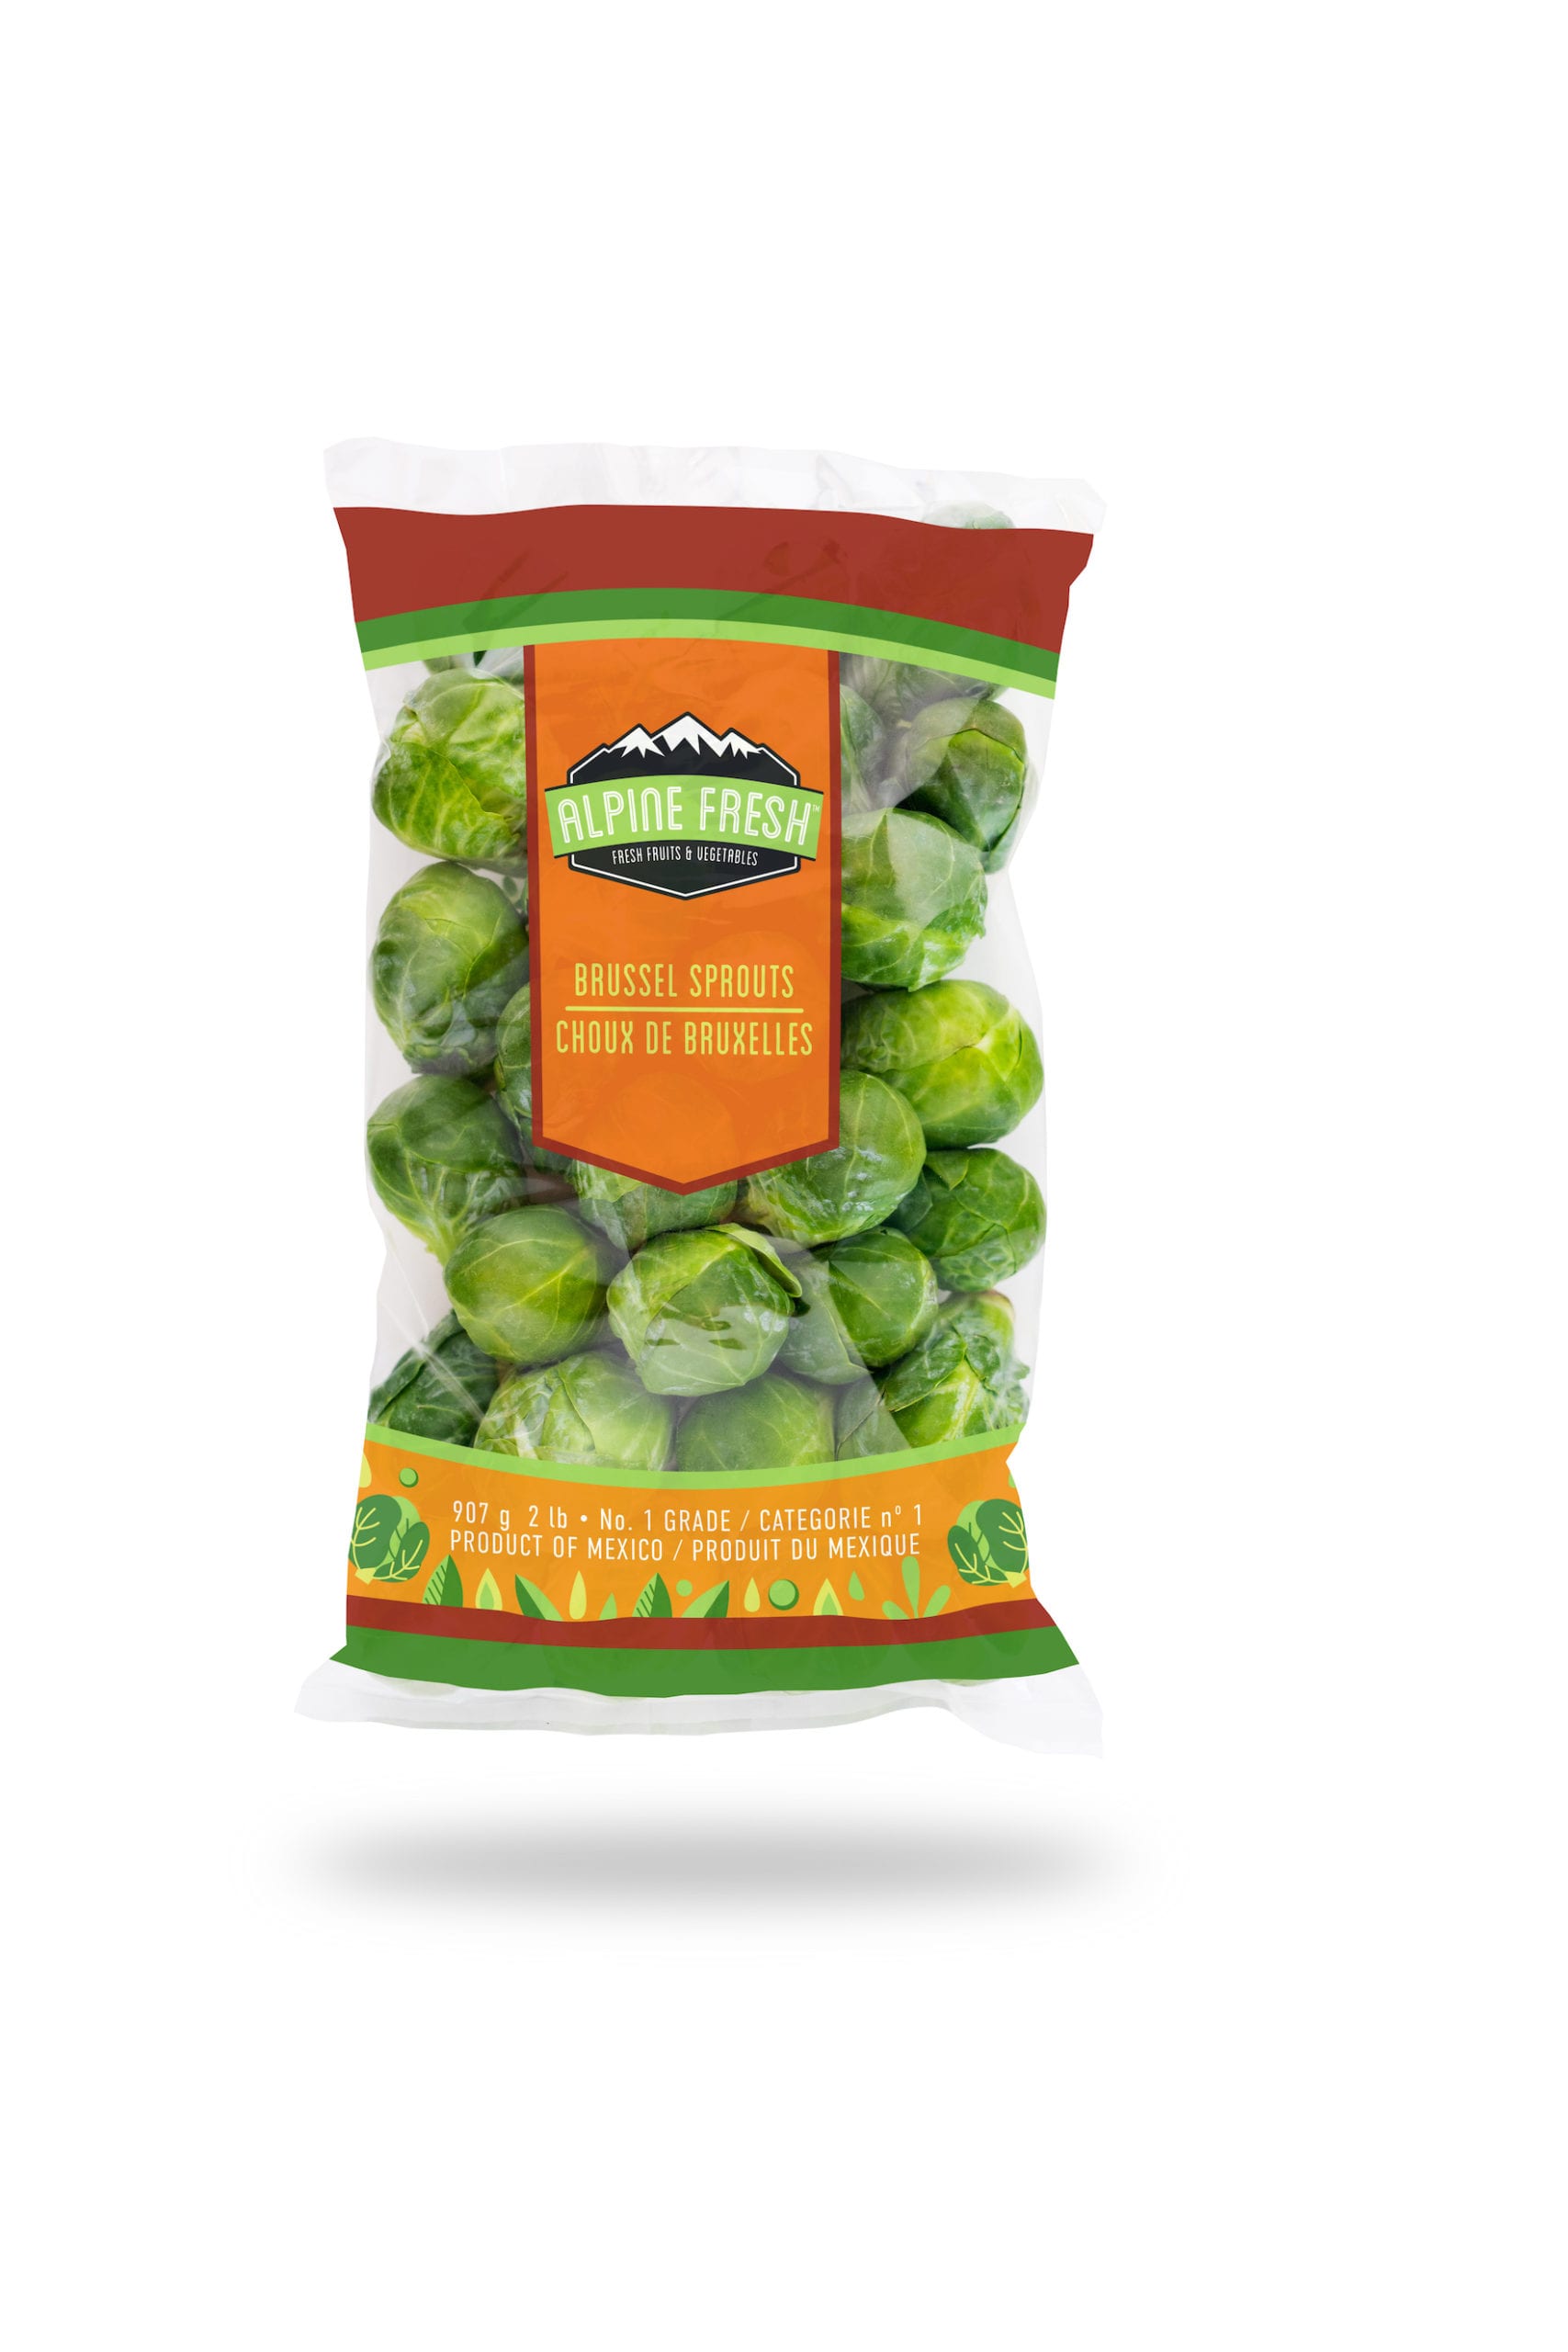 Bag of Alpine Fresh Brussel Sprouts from Mexico